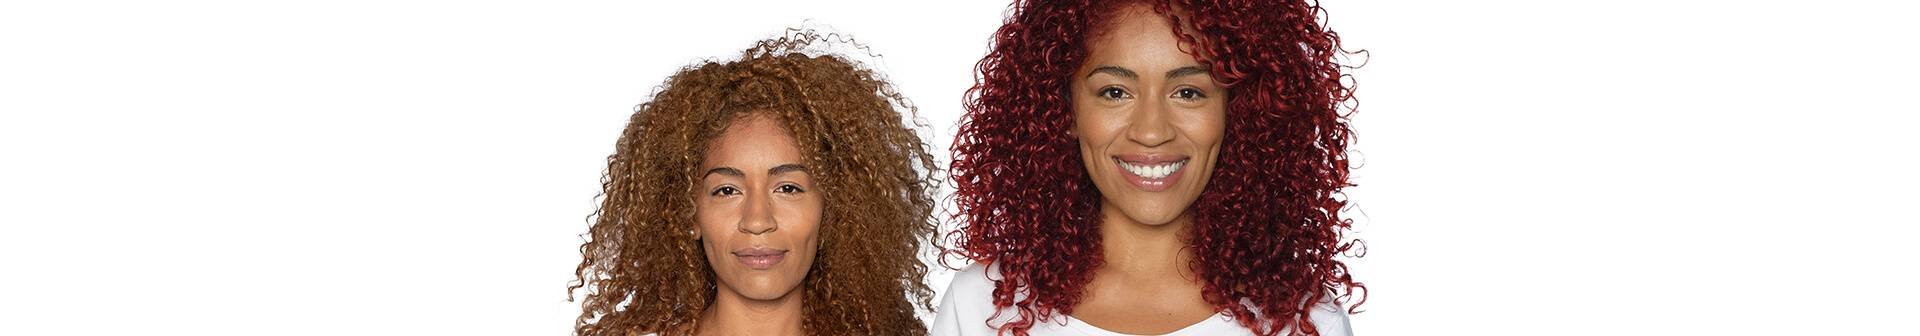 How to avoid patchy hair when dying your hair